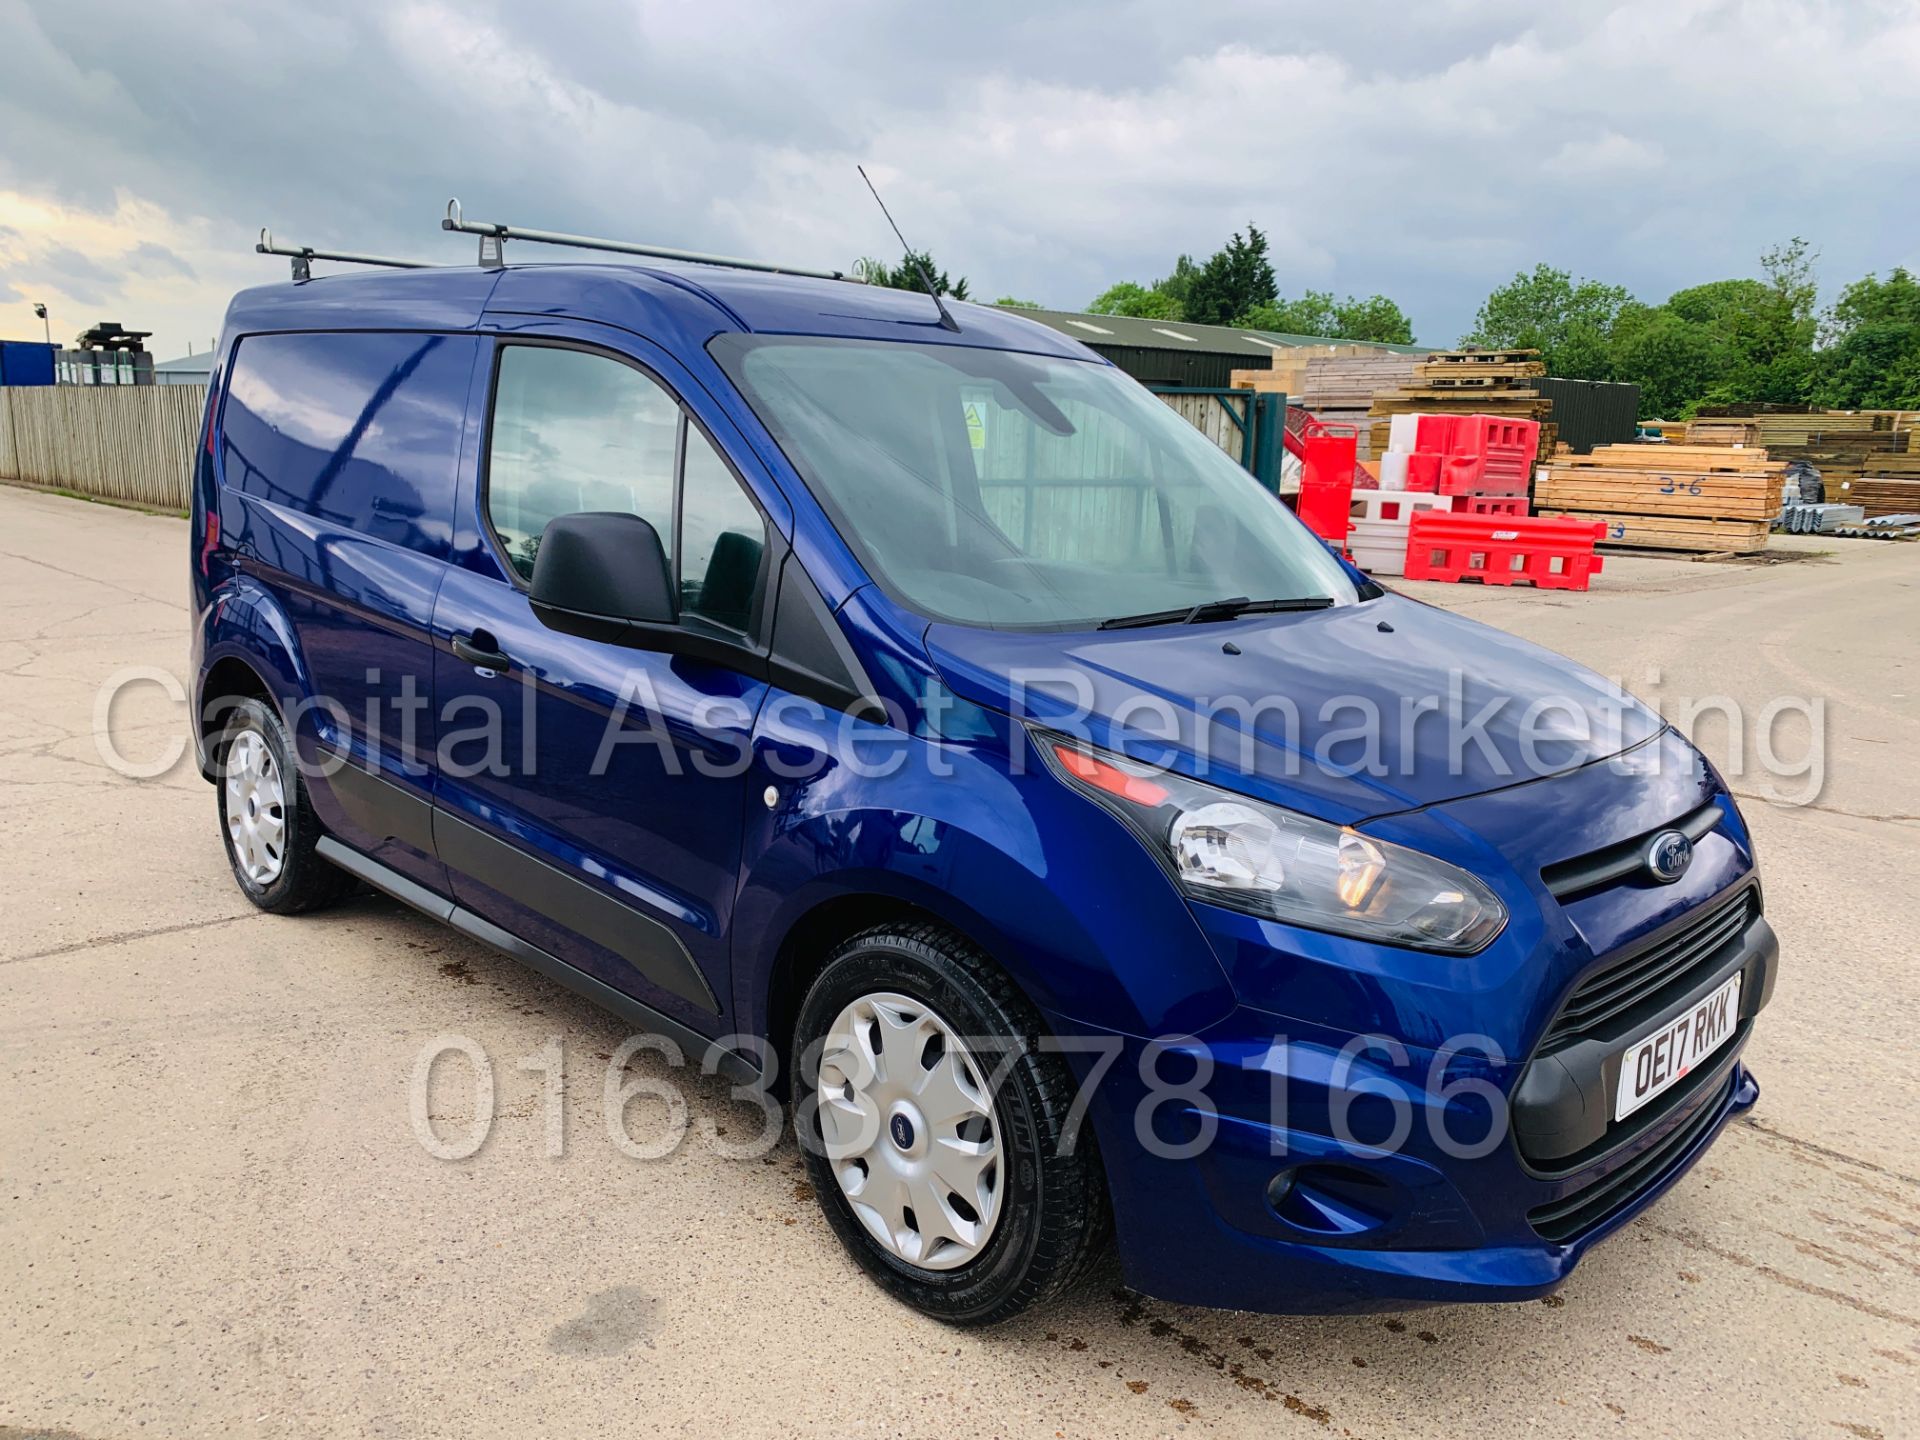 (On Sale) FORD TRANSIT CONNECT *TREND* SWB (2017 - EURO 6 VERSION) '1.5 TDCI - 100 BHP' (1 OWNER) - Image 12 of 39